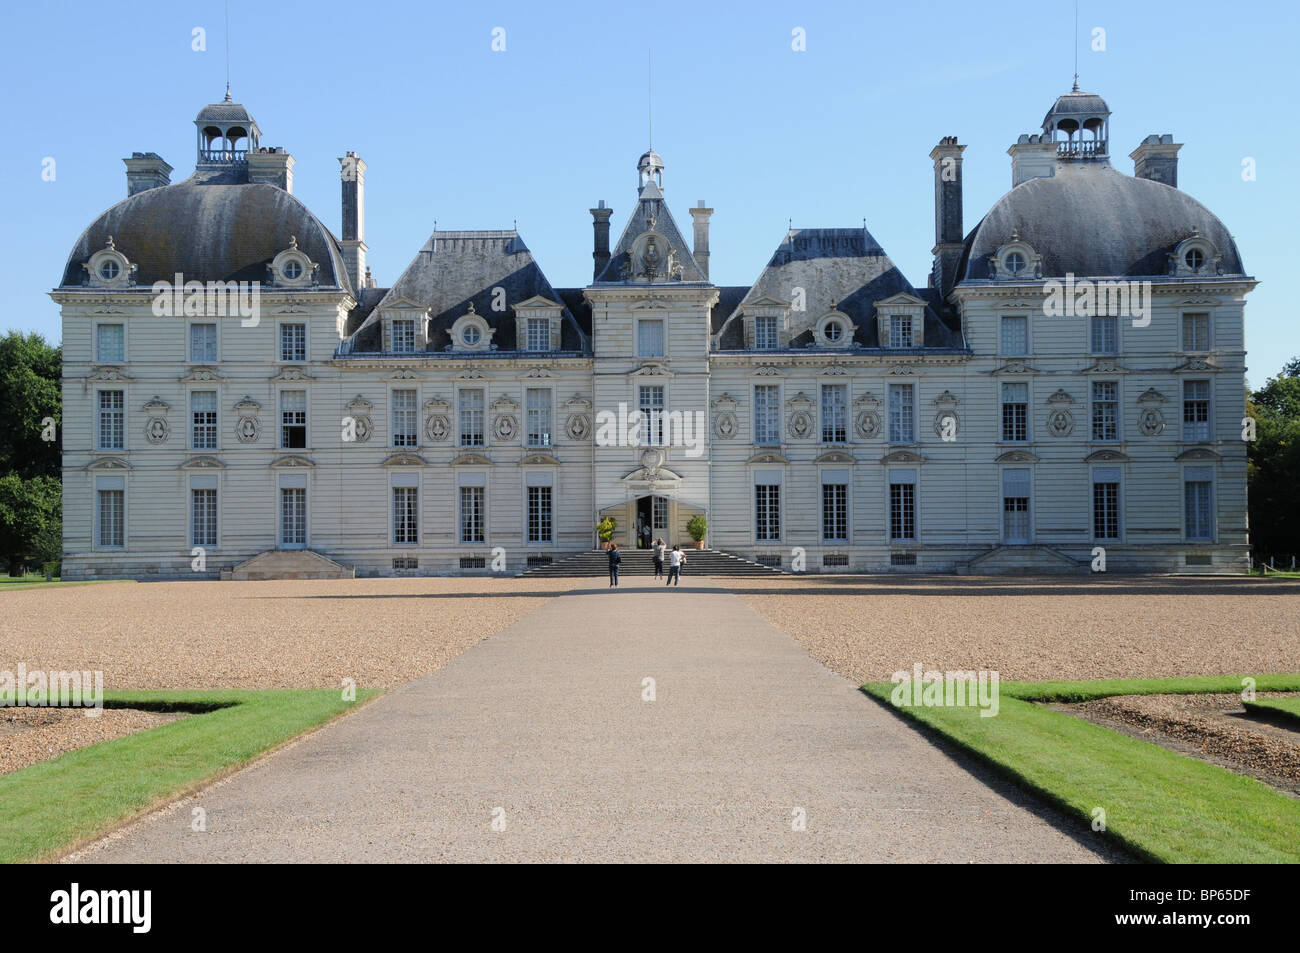 The south facade of the Chateau of Cherveny in the Loir et Cher department of France. Stock Photo